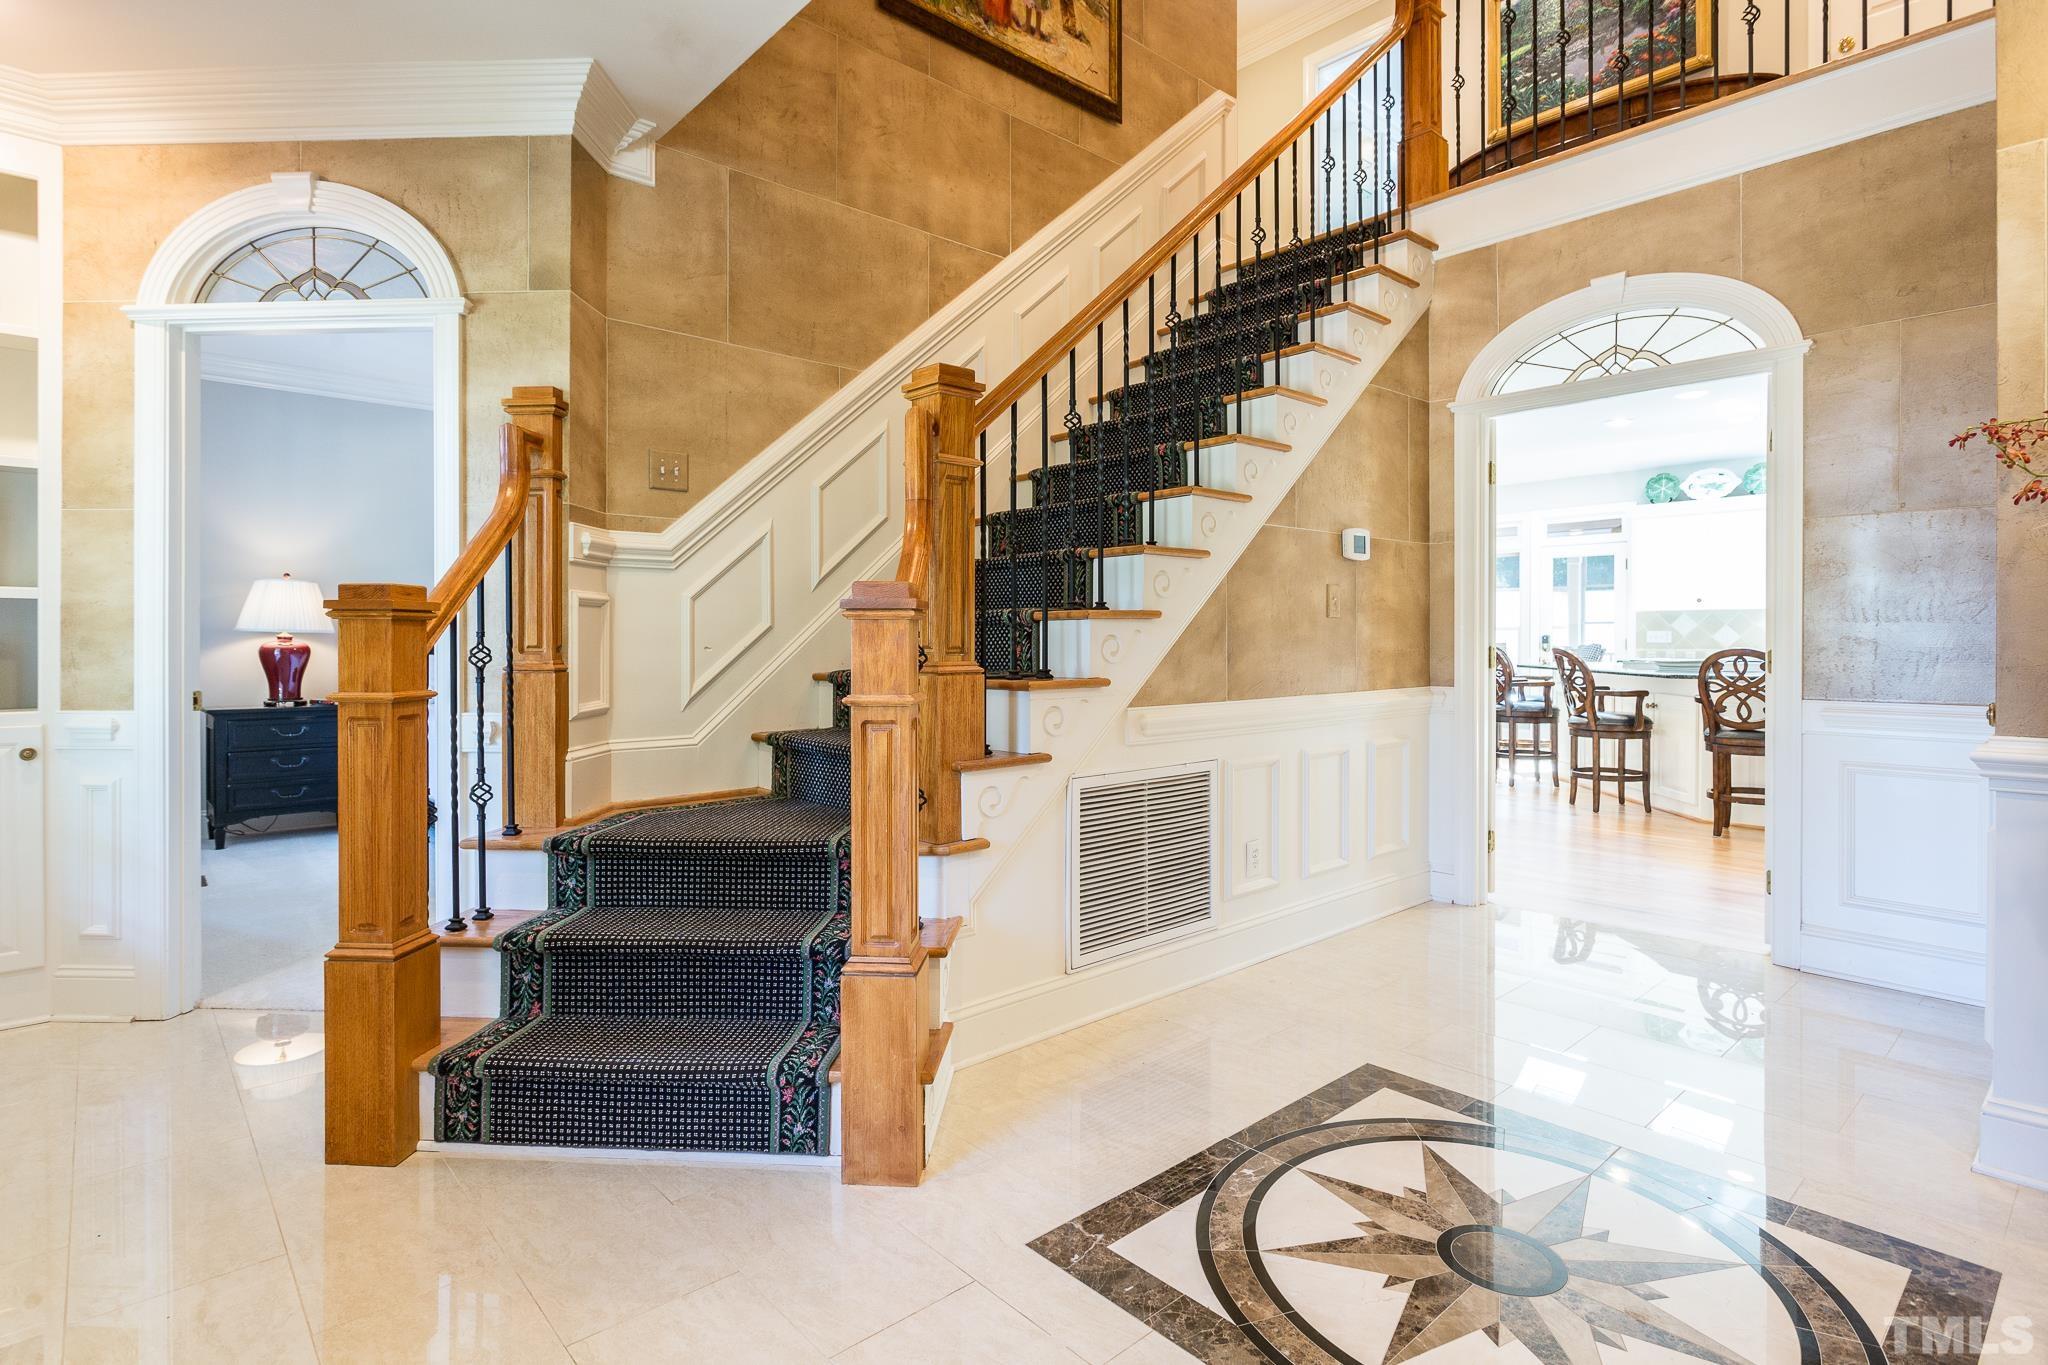 The gracious foyer welcomes you to the home and features a turned staircase, wrought iron spindles, display shelving on either side of the front door, coat closet, faux painted walls, and marble floors with a custom-designed inlay